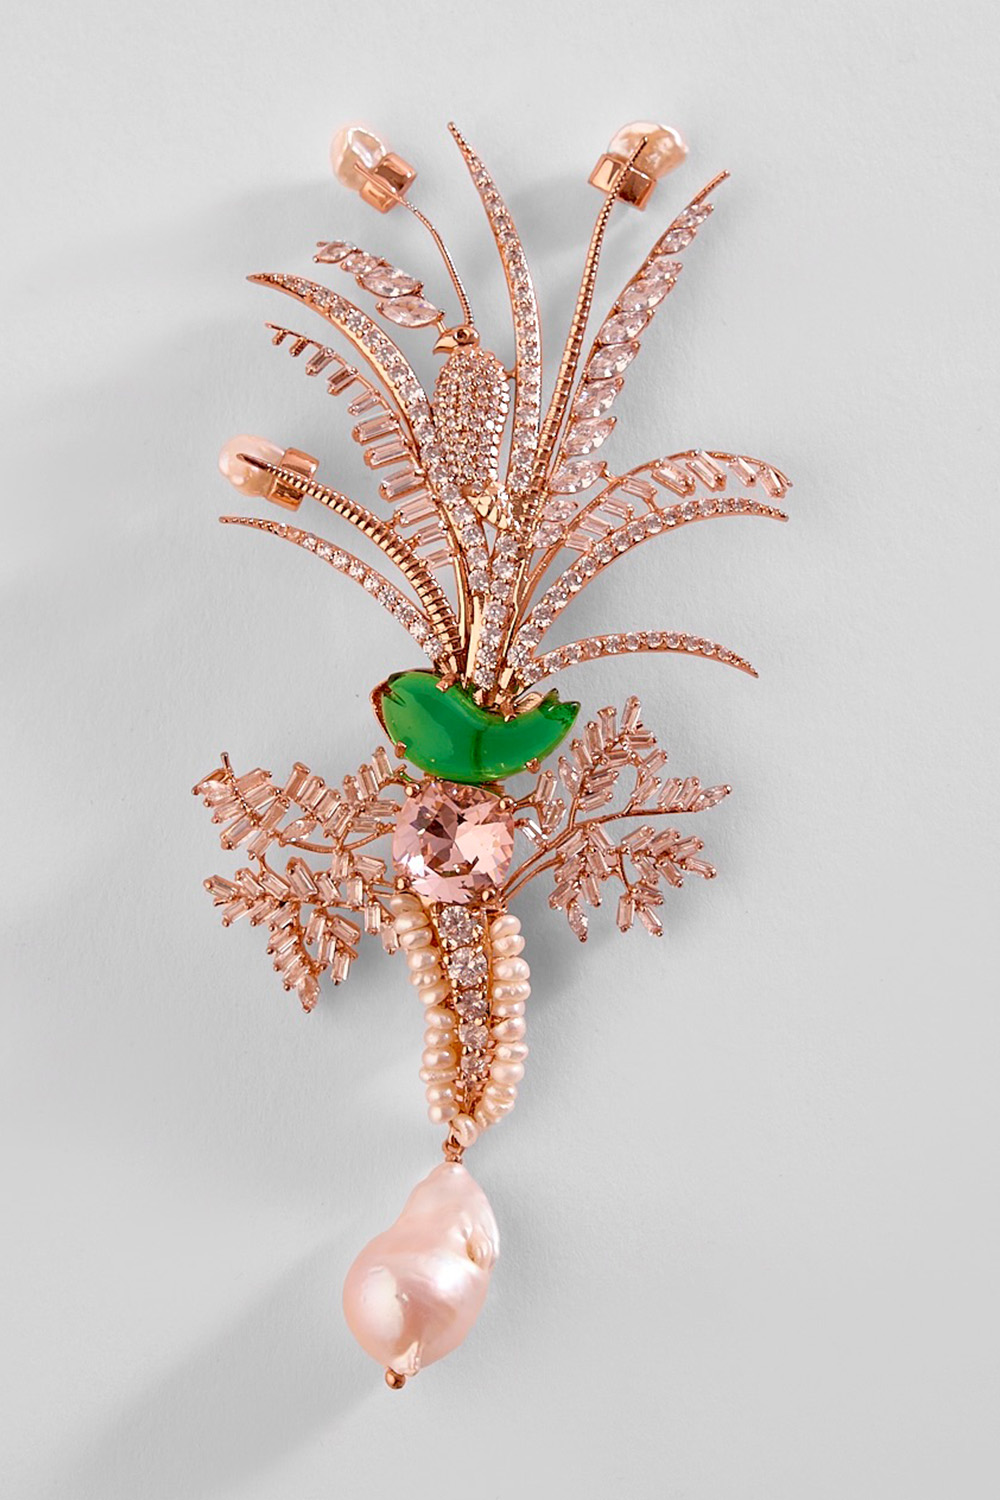 Le Sunset Palm Brooch in Jade Green